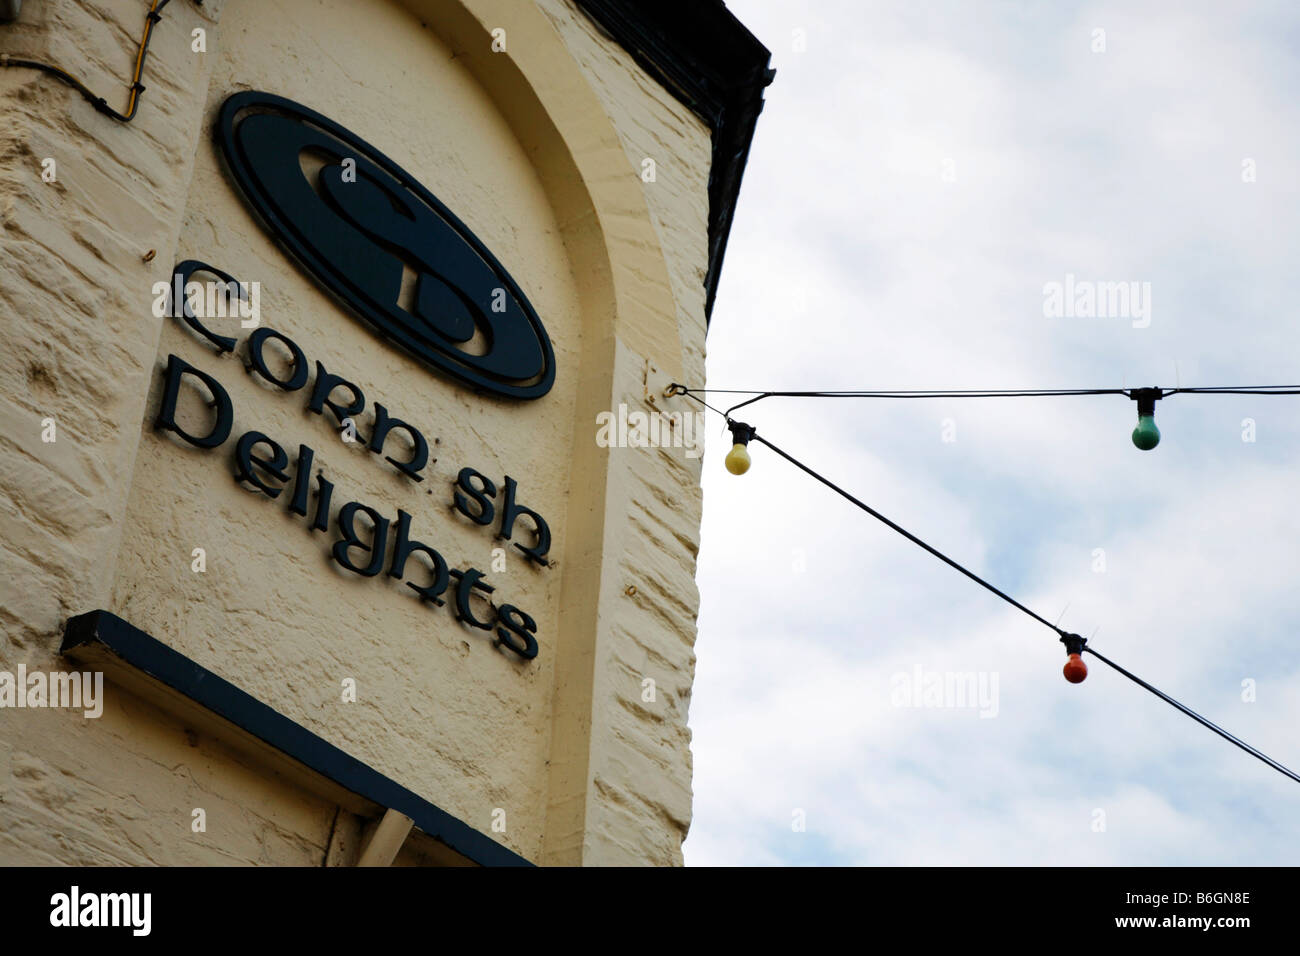 Cornish Delights shop sign, Padstow, Cornwall Stock Photo